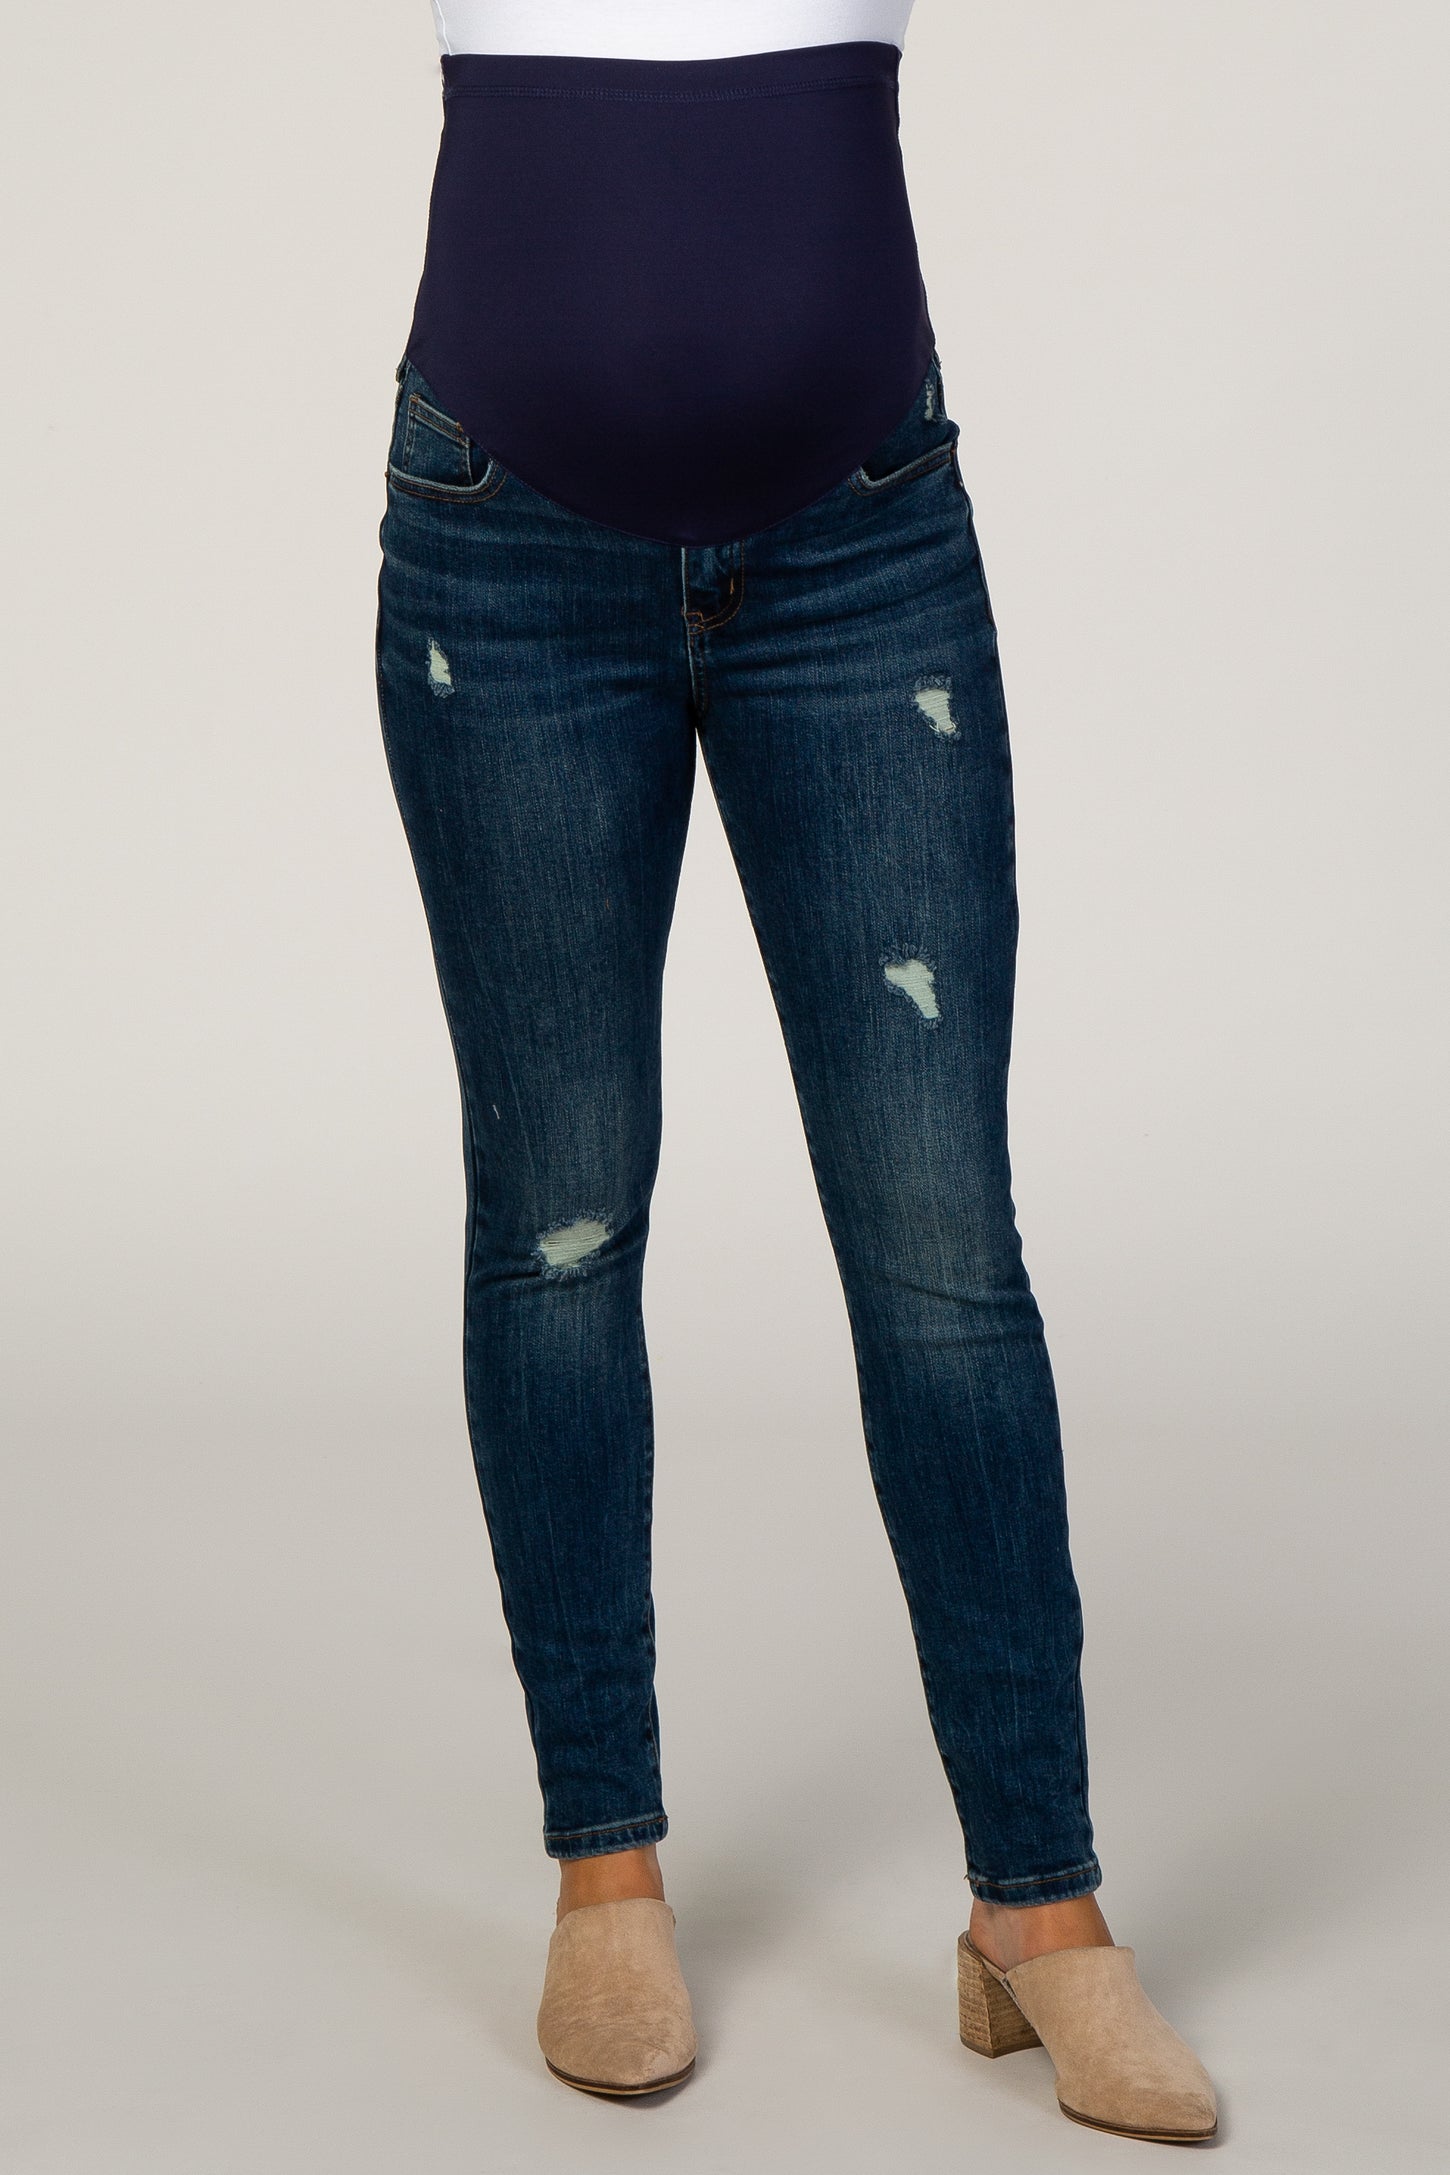 PinkBlush Navy Blue Lightly Distressed Maternity Jeans